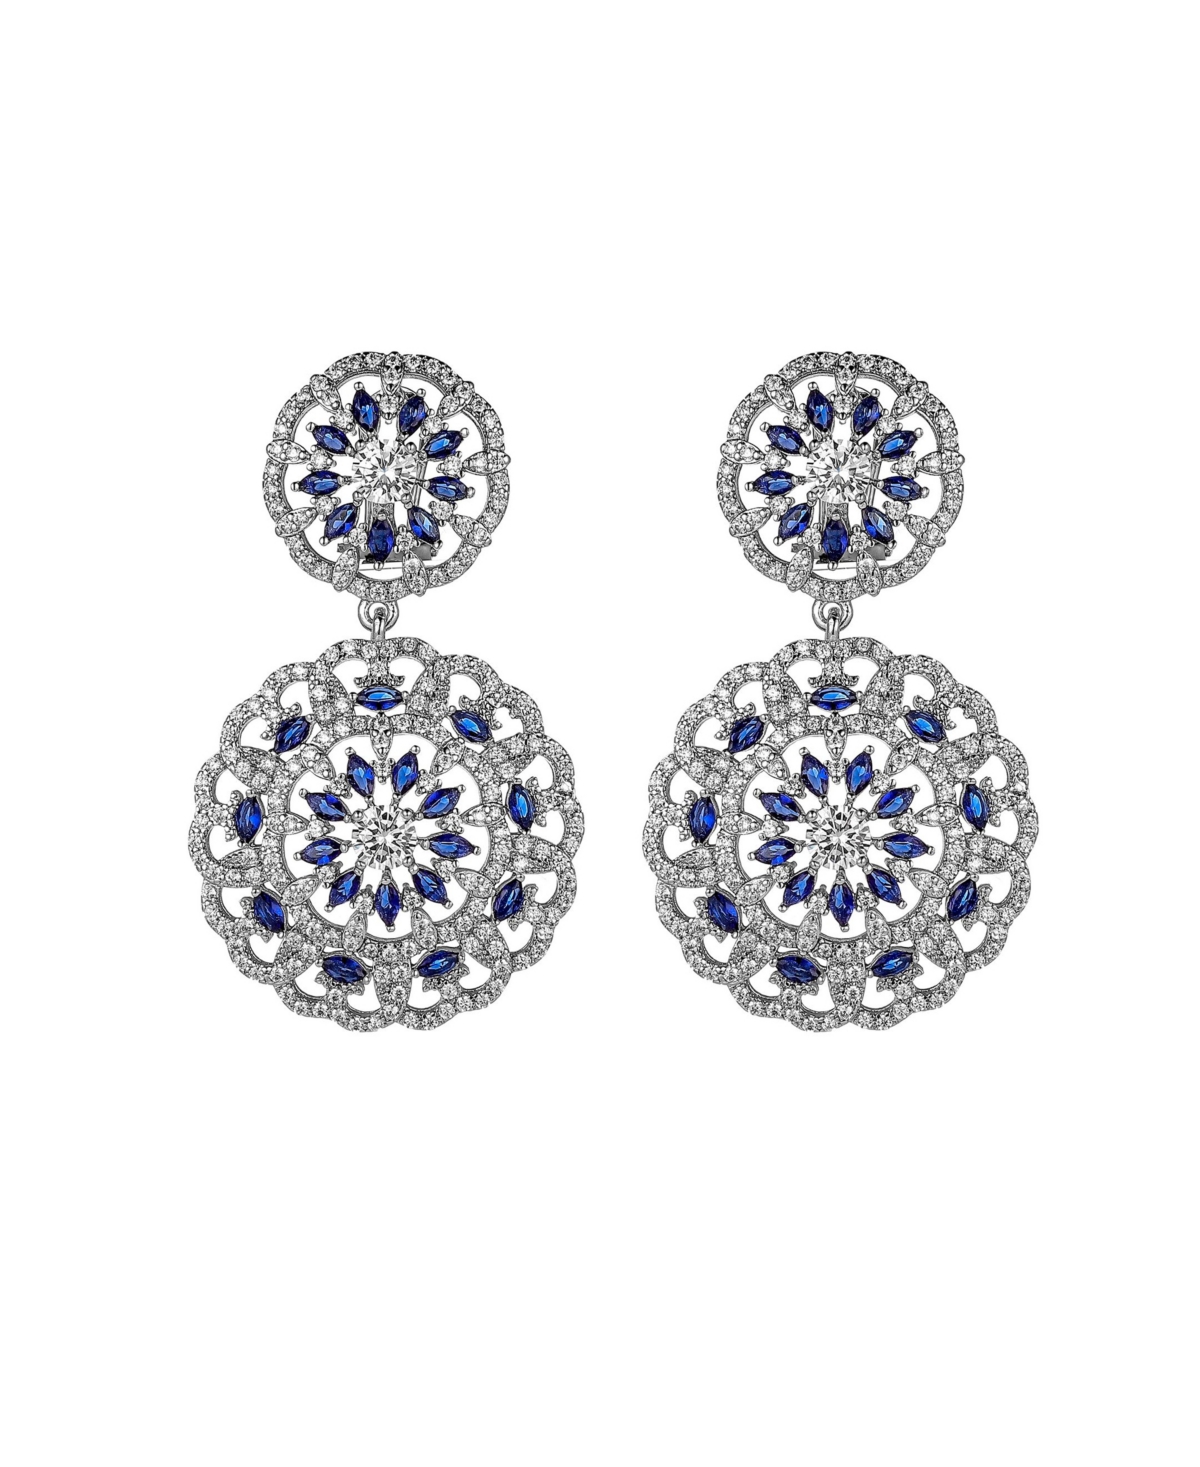 A & M Silver-Tone Sapphire Accent Disc Earrings